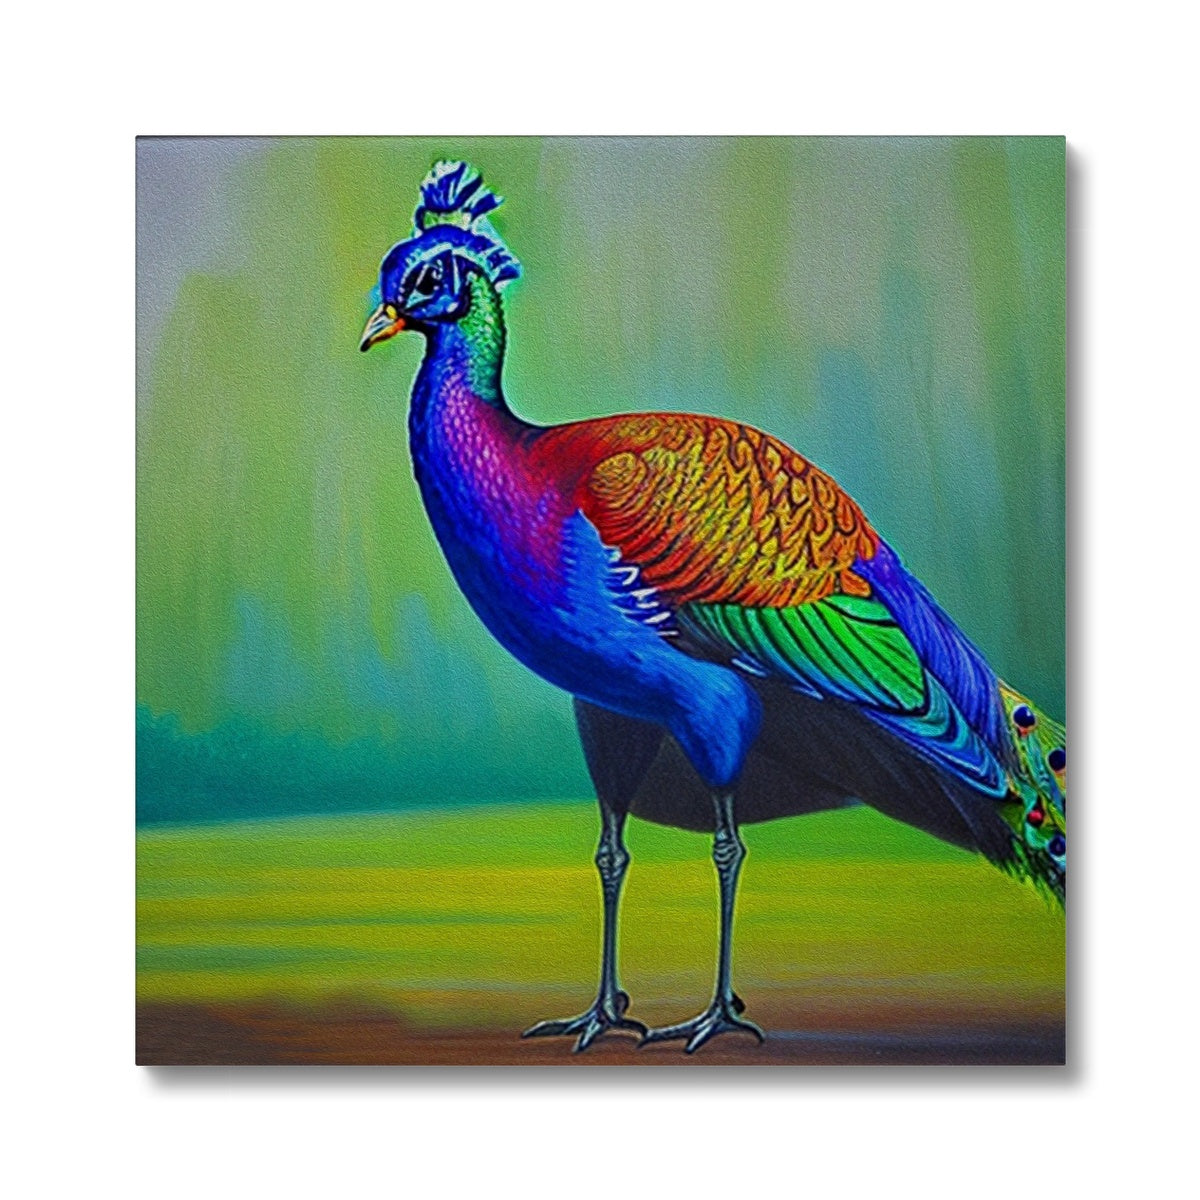 Impeccable Peacock Painting Canvas